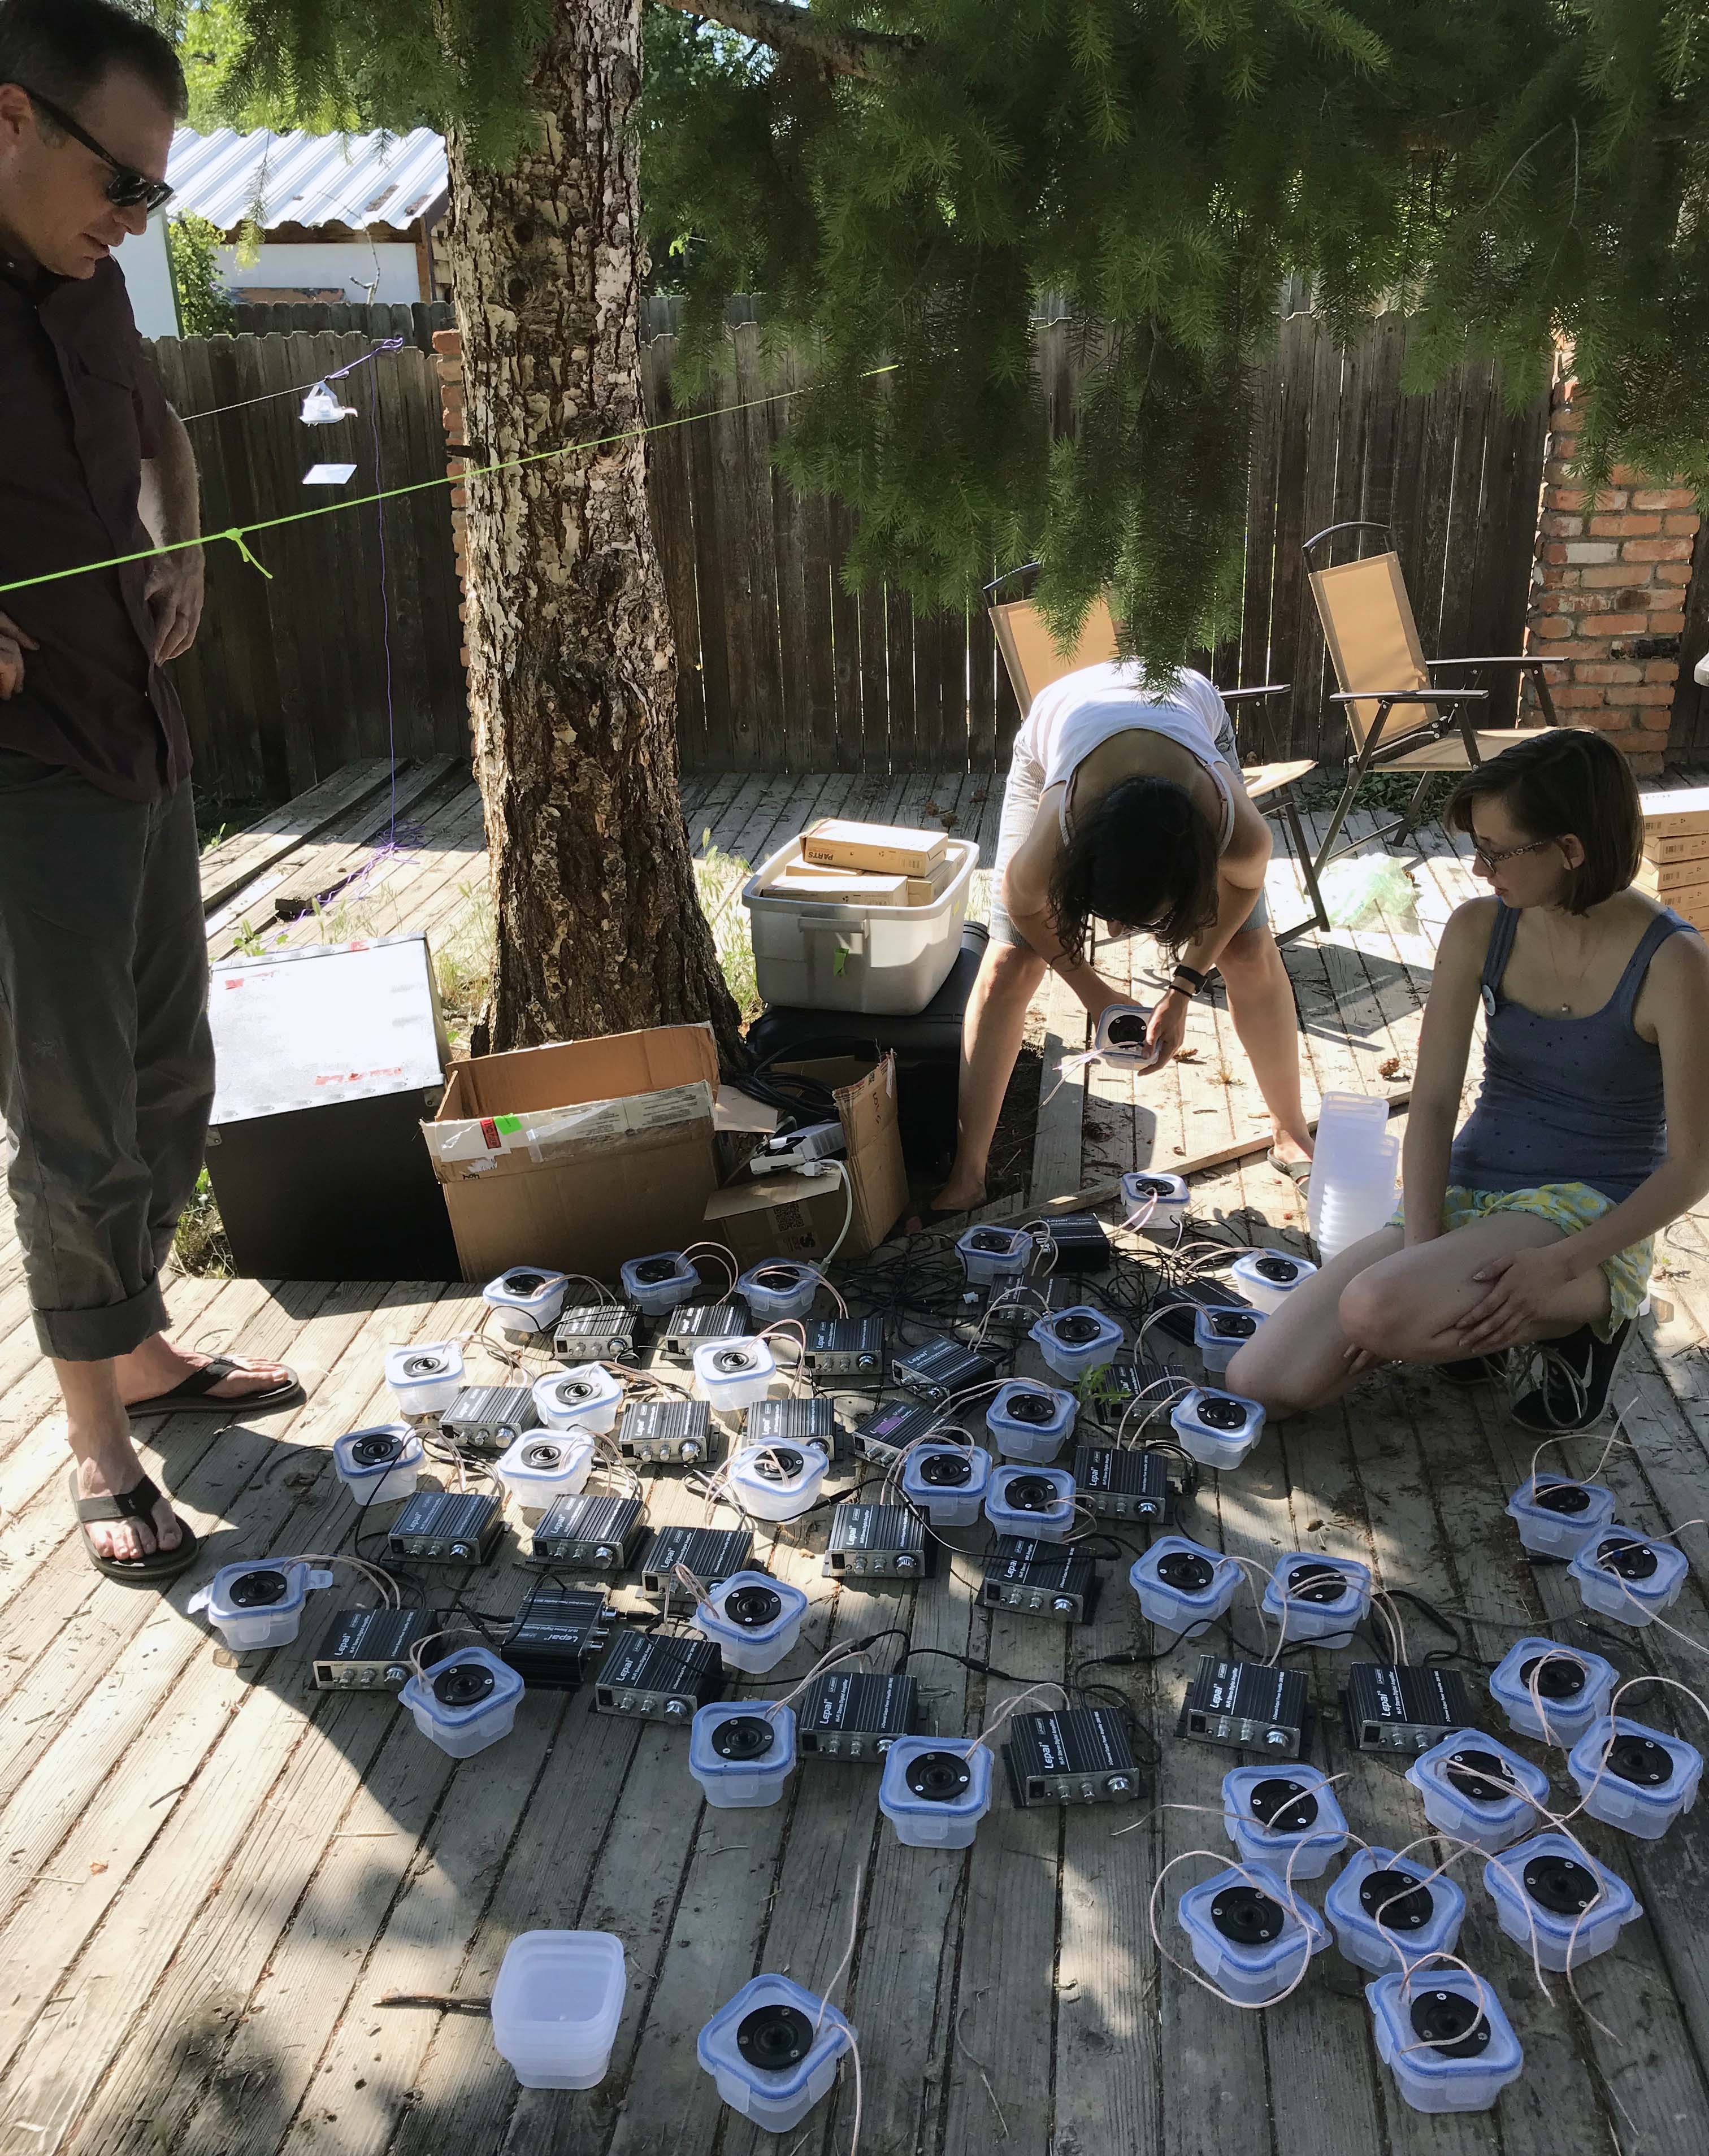 Our custom-built speaker array was the result of trial and error. The biggest challenge was scaling up from one, 4-speaker unit to 25, 4-speaker units driven by 25 amplifiers. Here, Dr. Jesse Barber (left), Juliette Rubin (middle) and Lemon Beckham (left) are testing the array design in Idaho, U.S.A. 